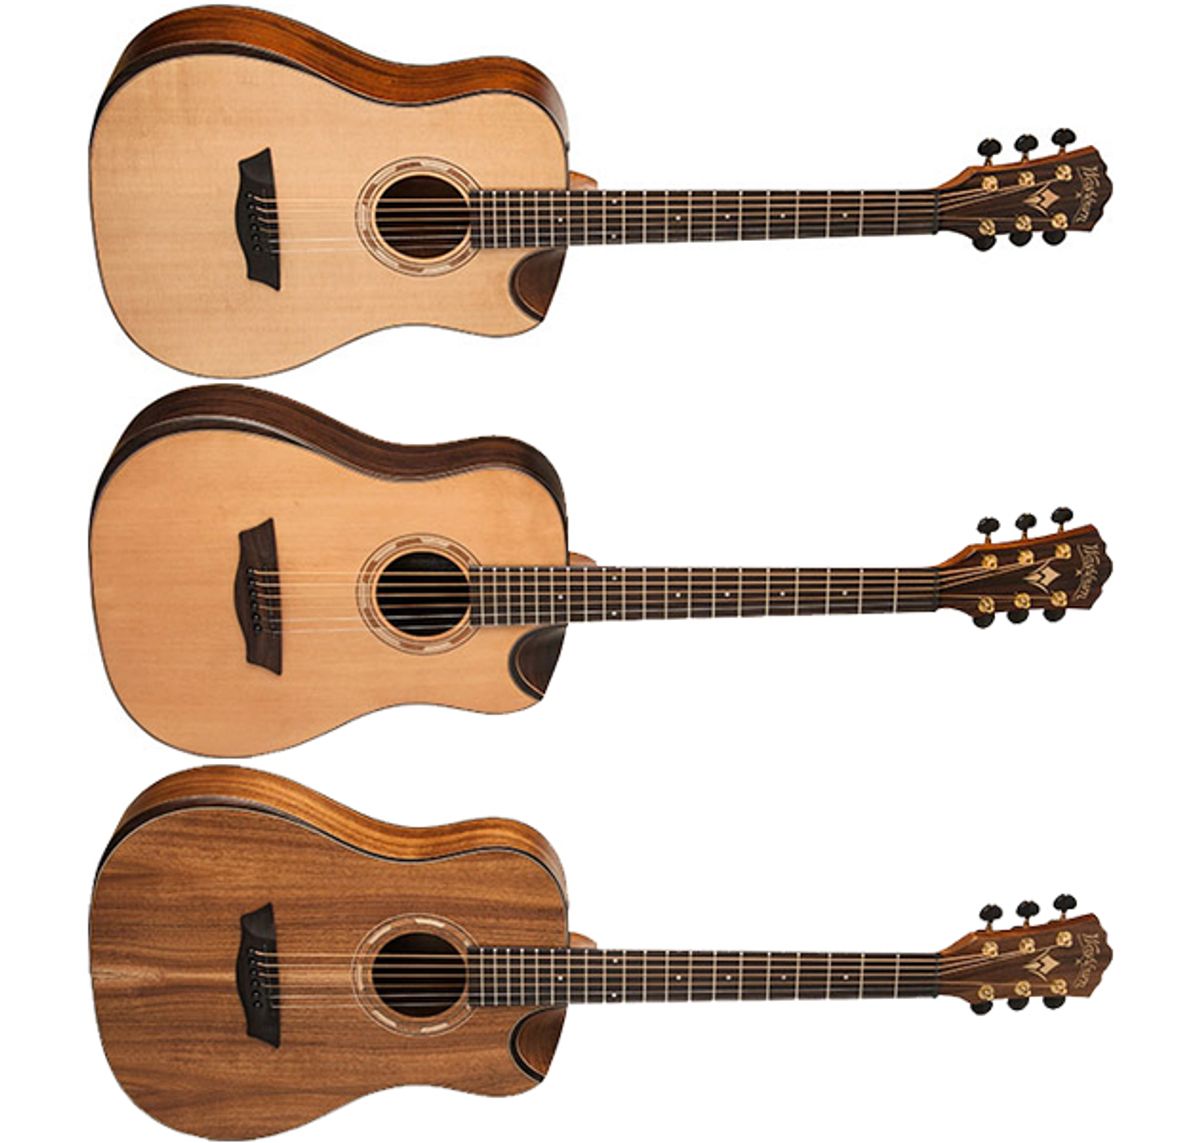 Washburn Guitars Announces Expansion of Comfort Series